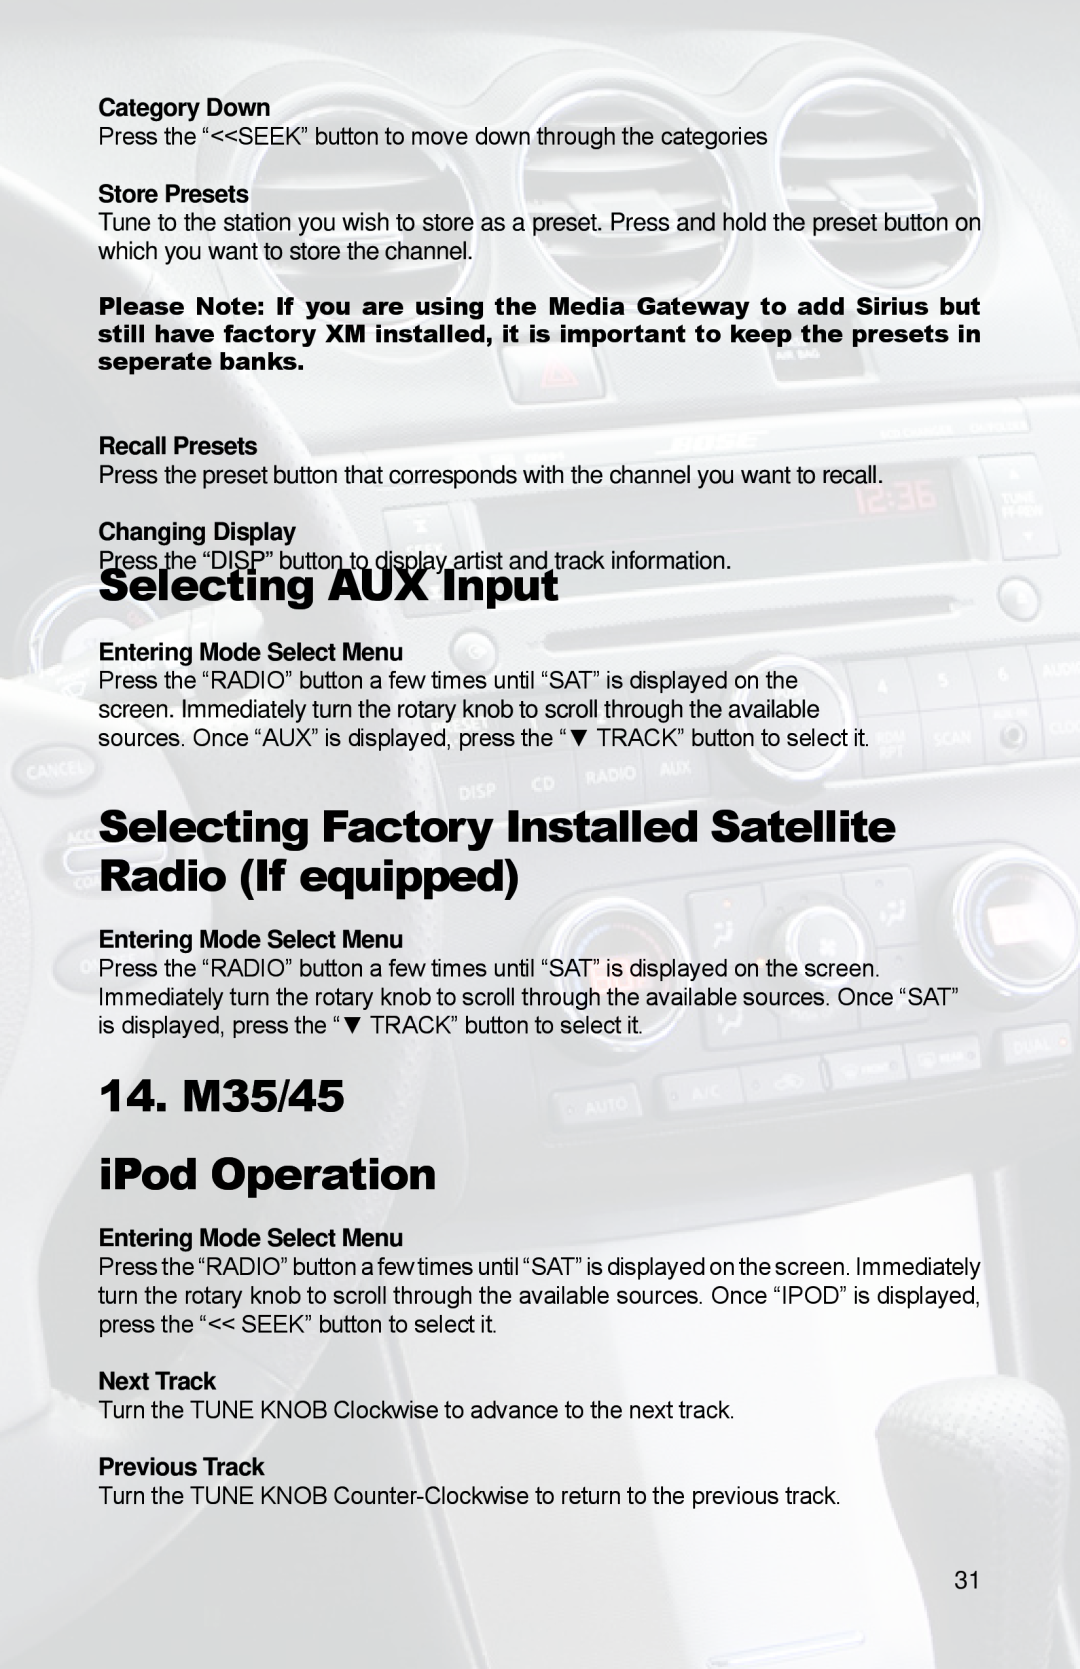 iSimple PGHNI2 owner manual Selecting AUX Input, 14.M35/45 iPod Operation 